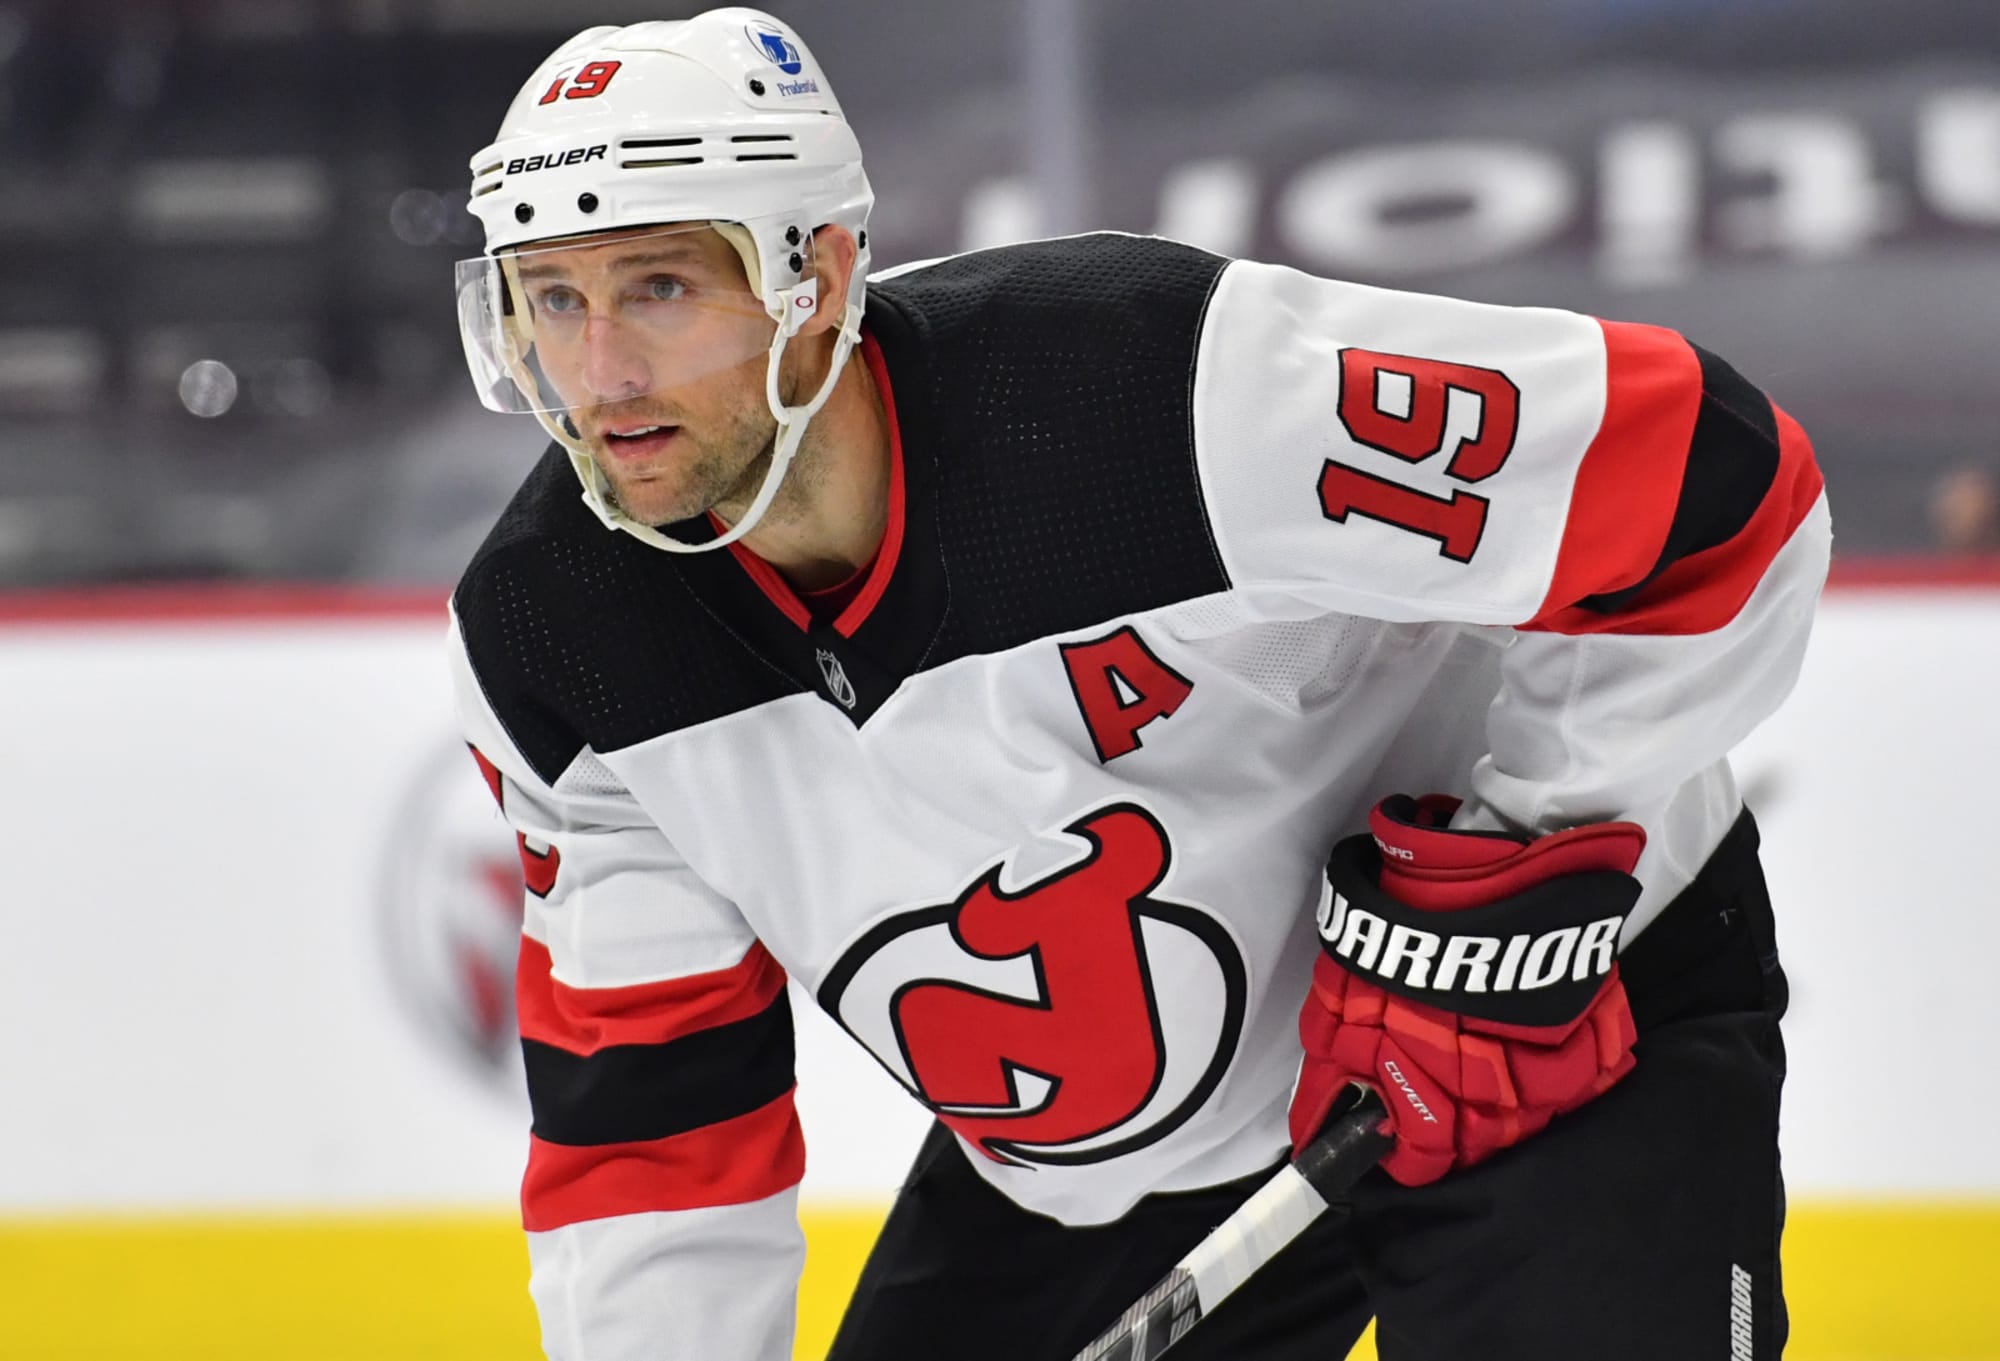 Travis Zajac signs 8-year deal with Devils, demonstrates contract